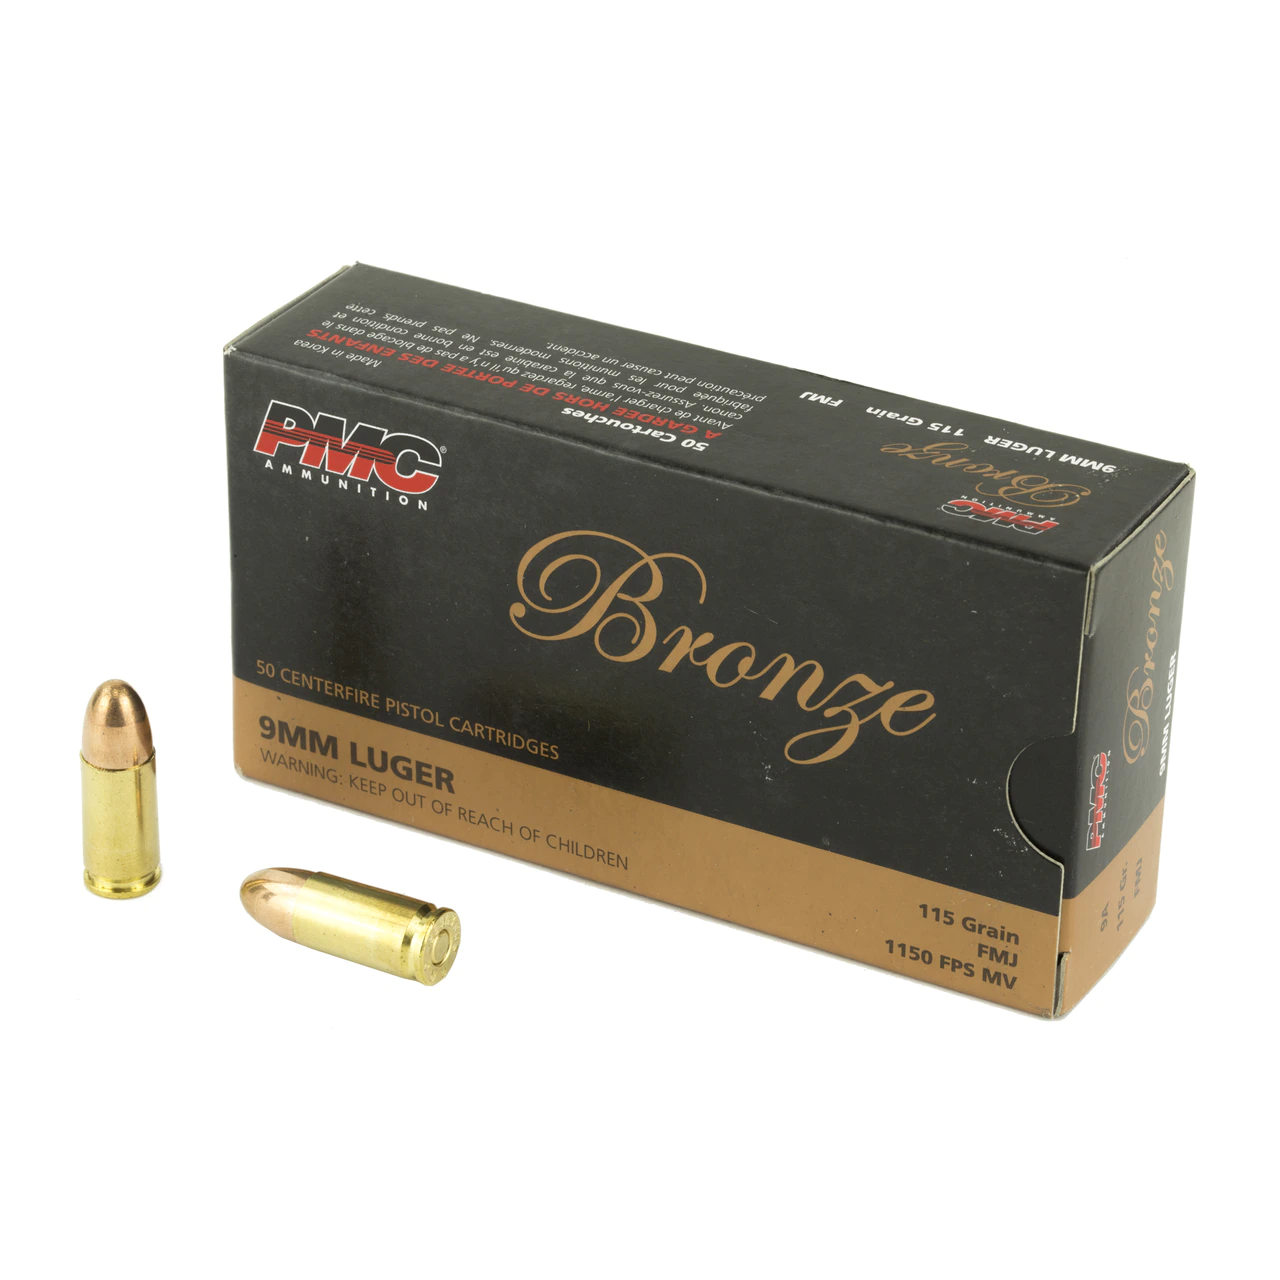 PMC Bronze 9mm 115GR FMJ Ammunition 50 Rounds - $39.98 (Free S/H over $100)